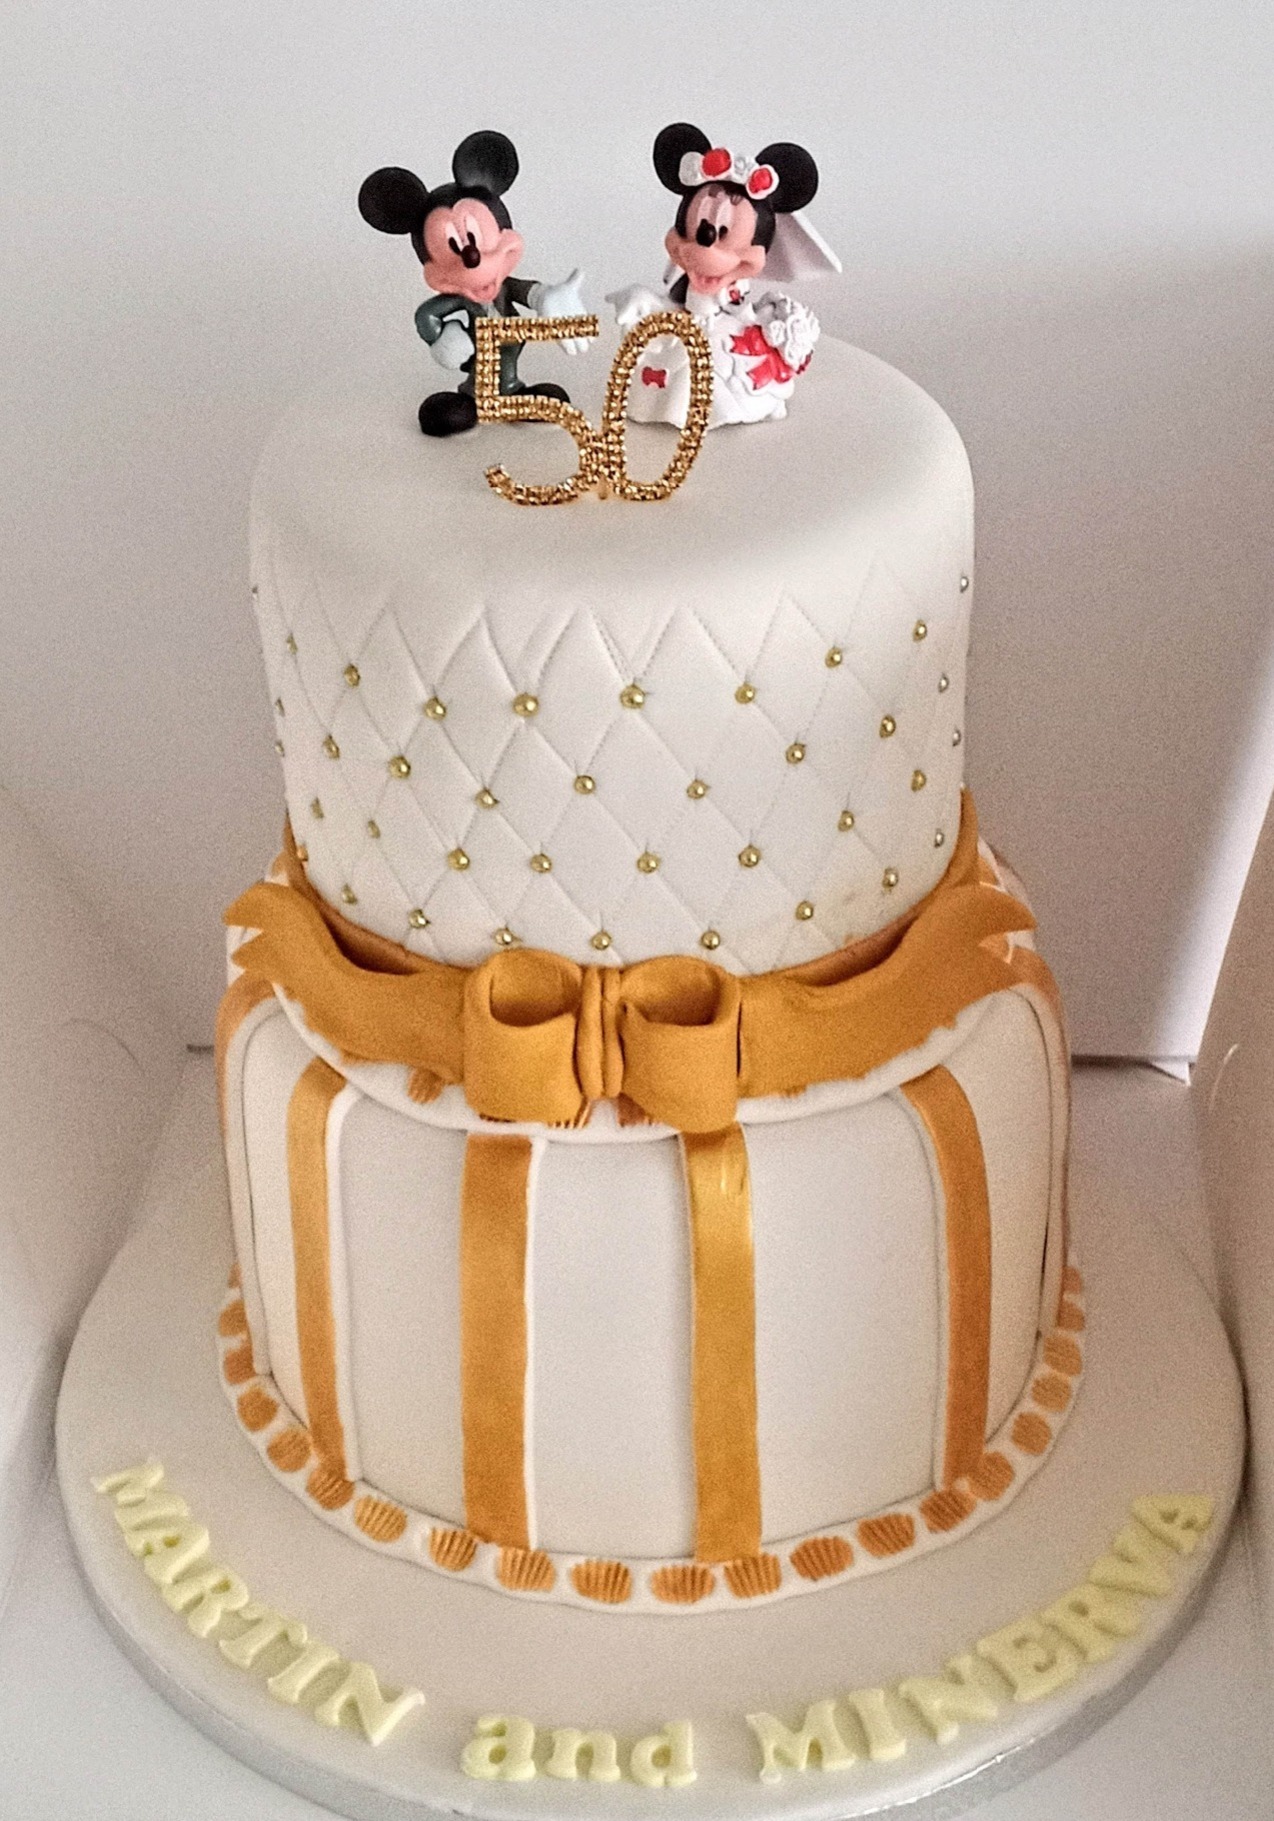 2 Tier wedding cake, white and gold with topper